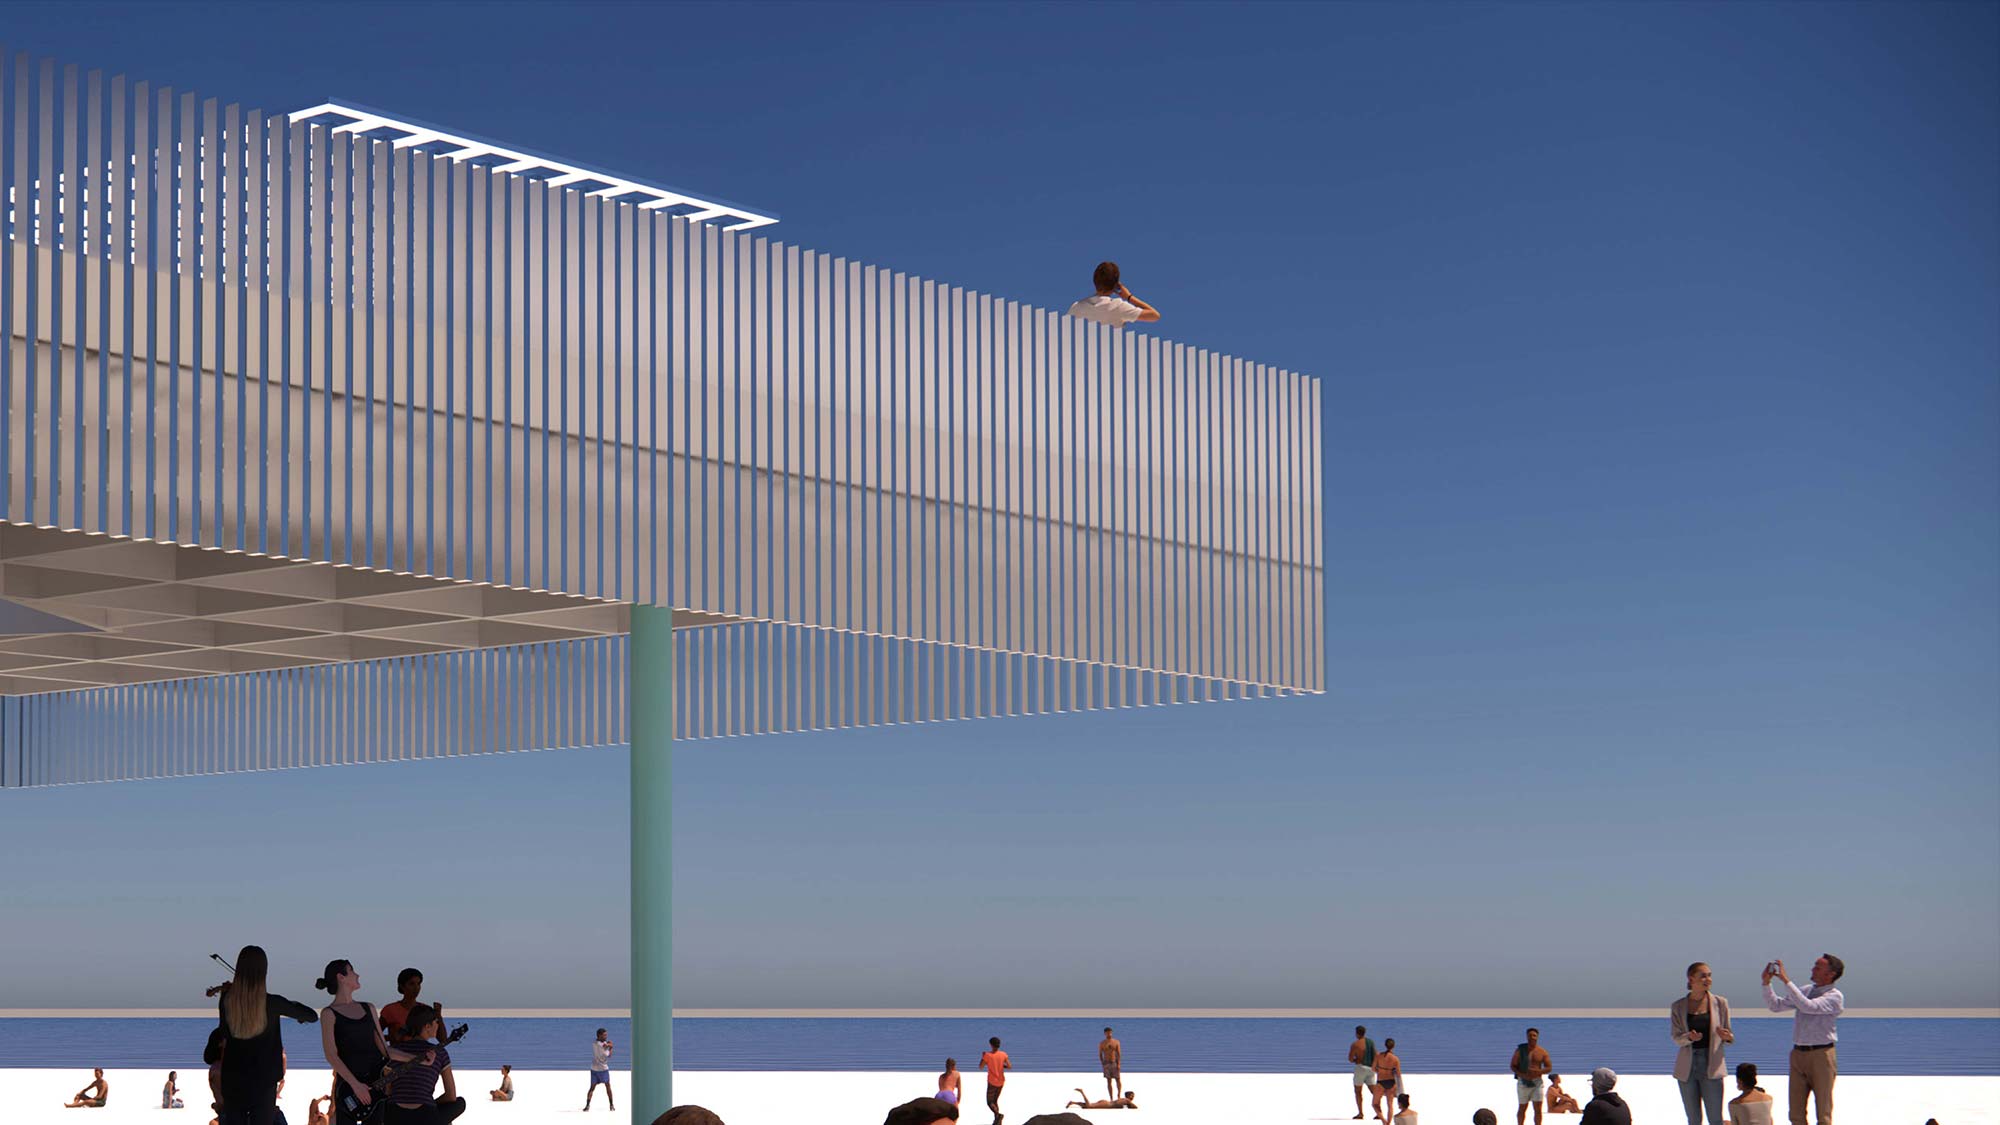 A mock-up of a design for the boardwalk, featuring a structure providing shade on the beach.